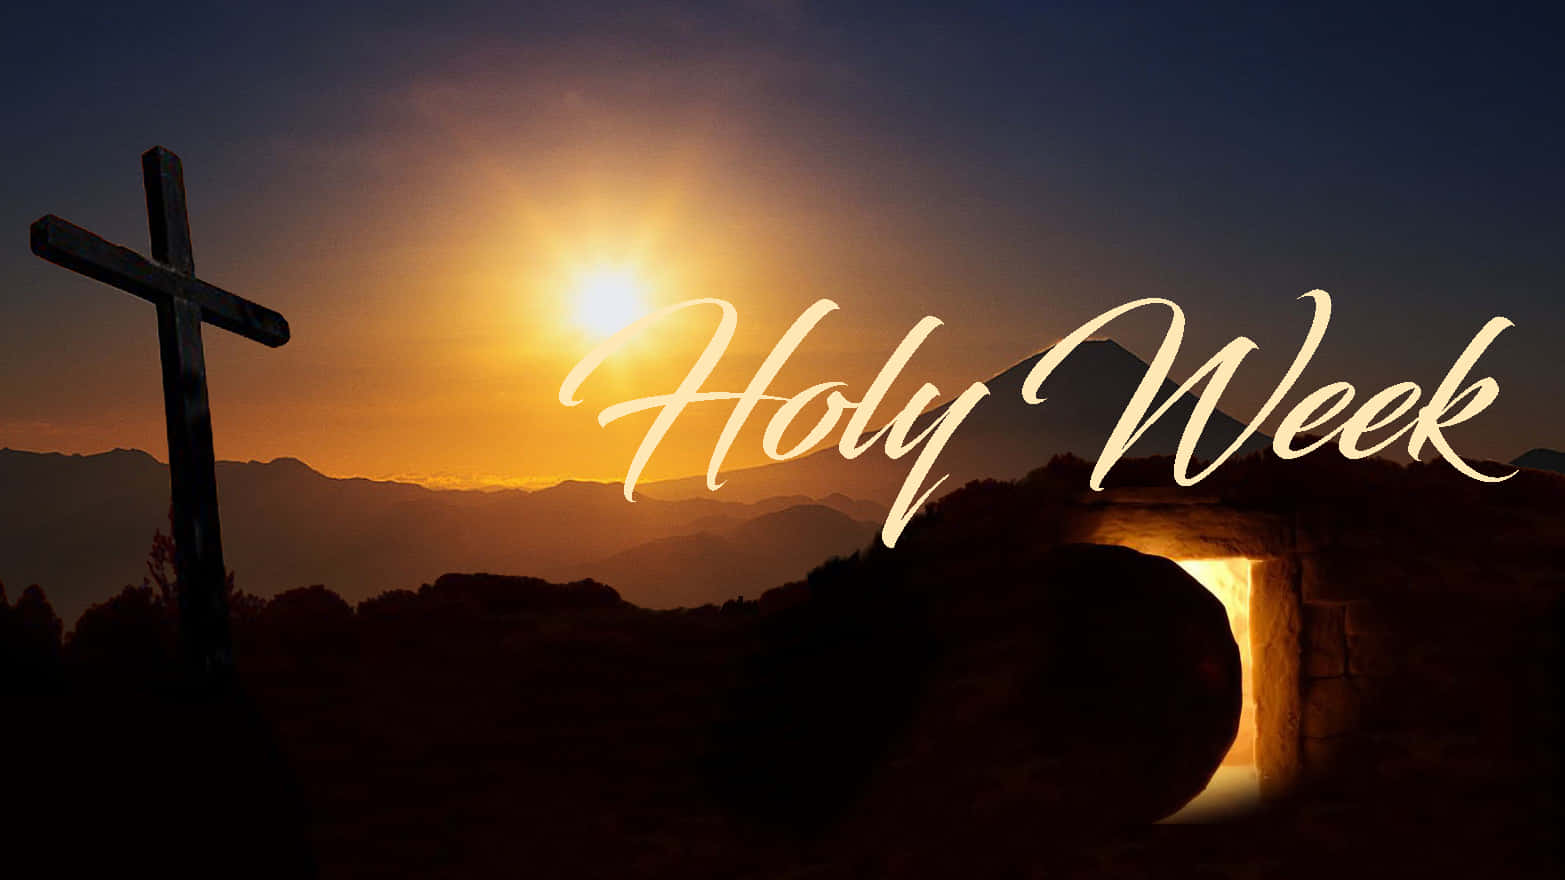 Celebrate Holy Week with devotion and reverence Wallpaper